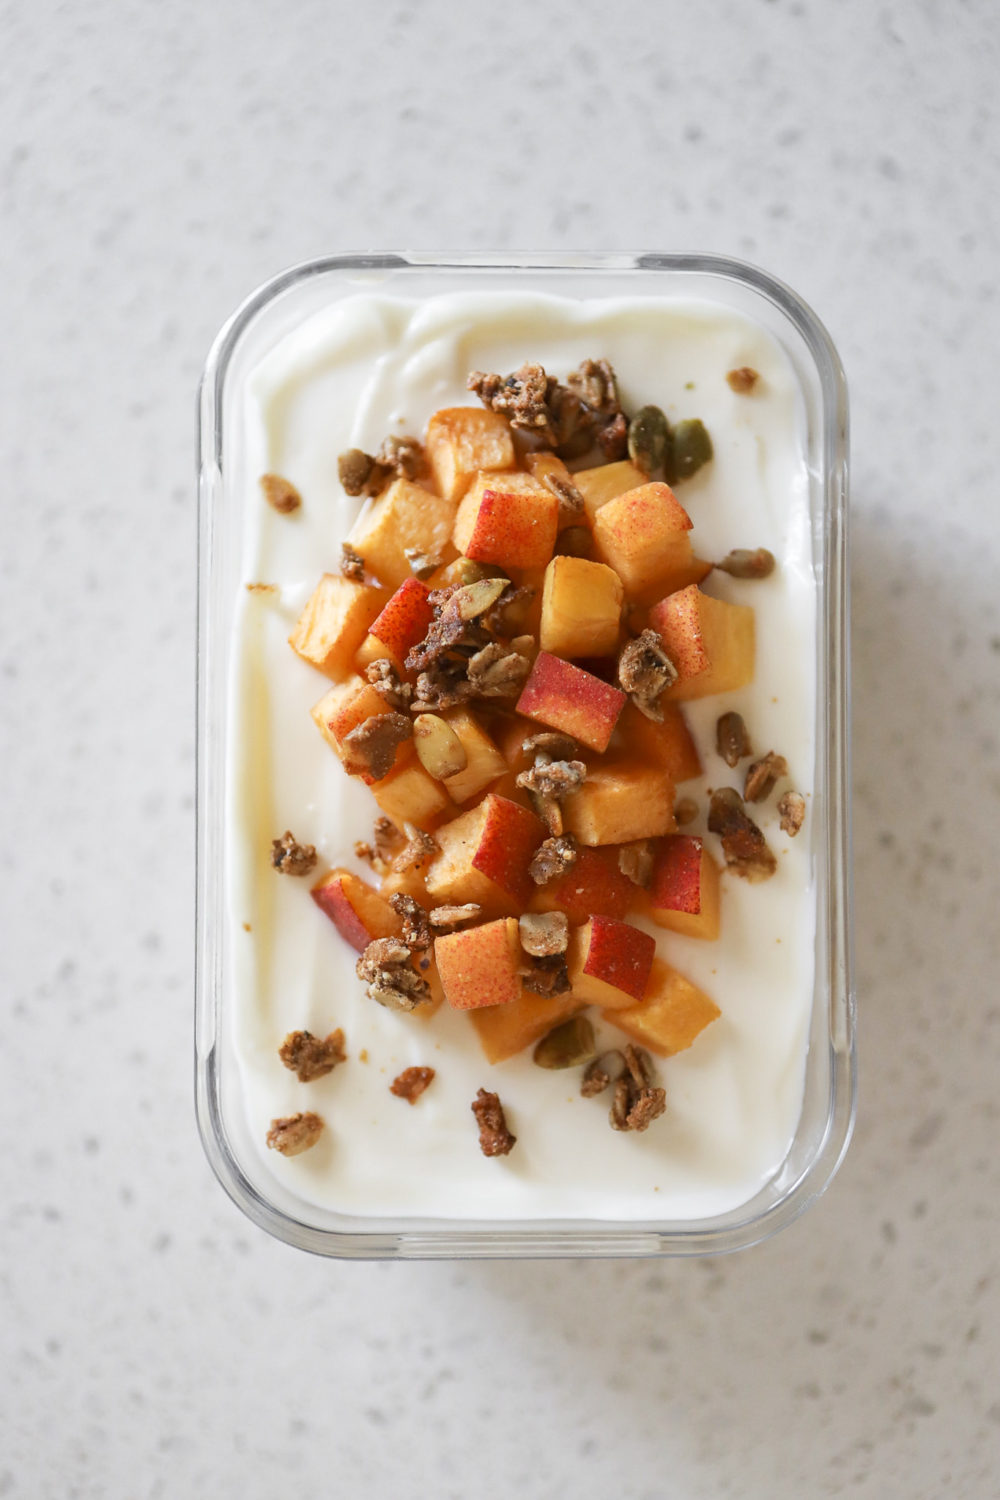 https://basicswithbails.com/wp-content/uploads/2022/07/peaches-n-cream-overnight-oats-scaled.jpg